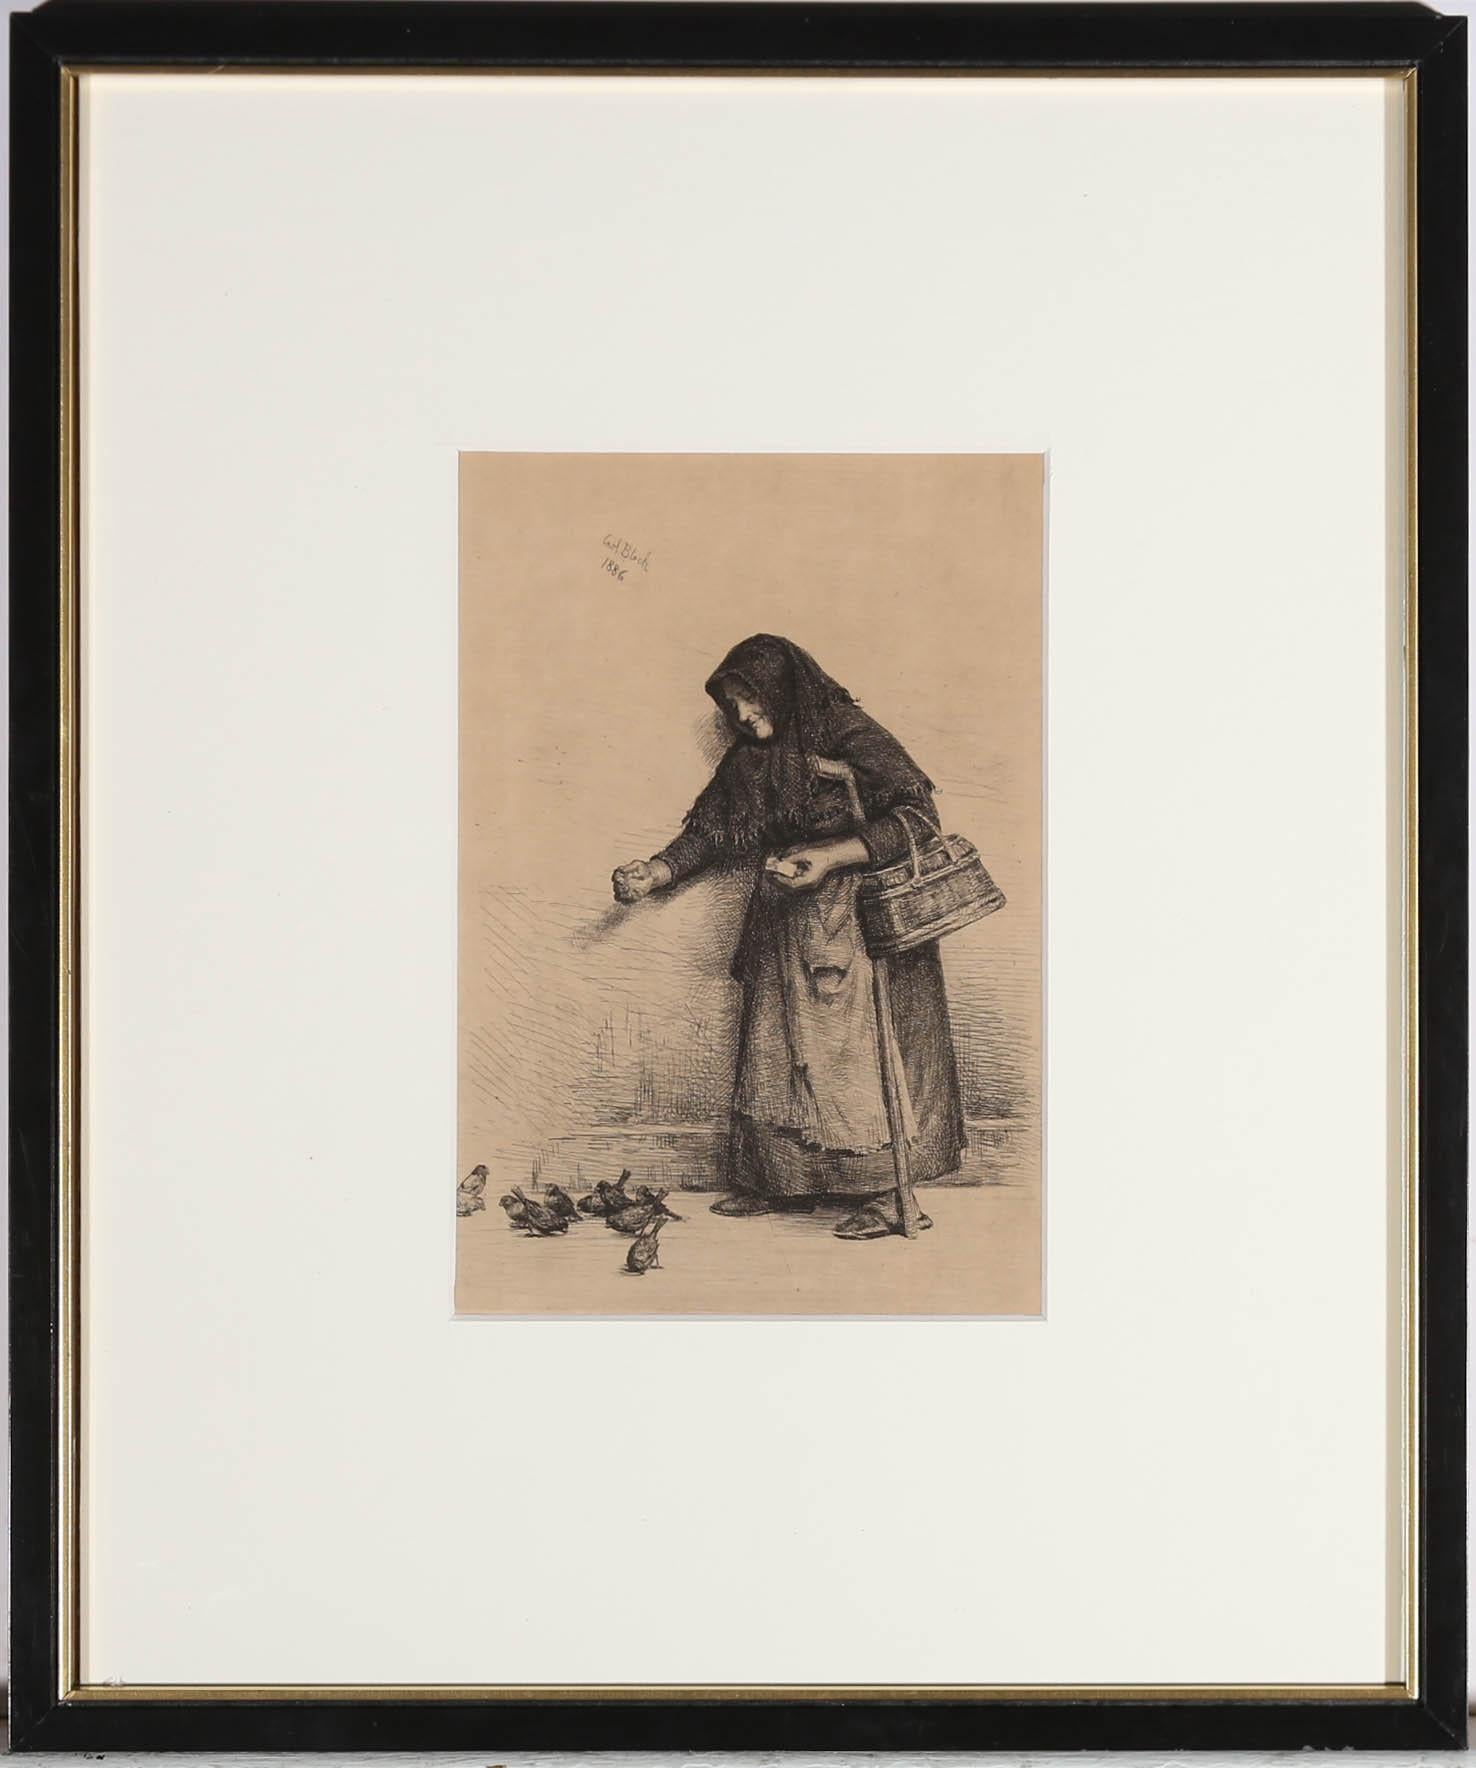 A fine late 19th century etching by the well listed Danish painter and printmaker, Carl Bloch (1834-1890). The print is signed and dated in plate to the upper left quadrant. Beautifully presented in a new mount and contemporary black and gilt frame.